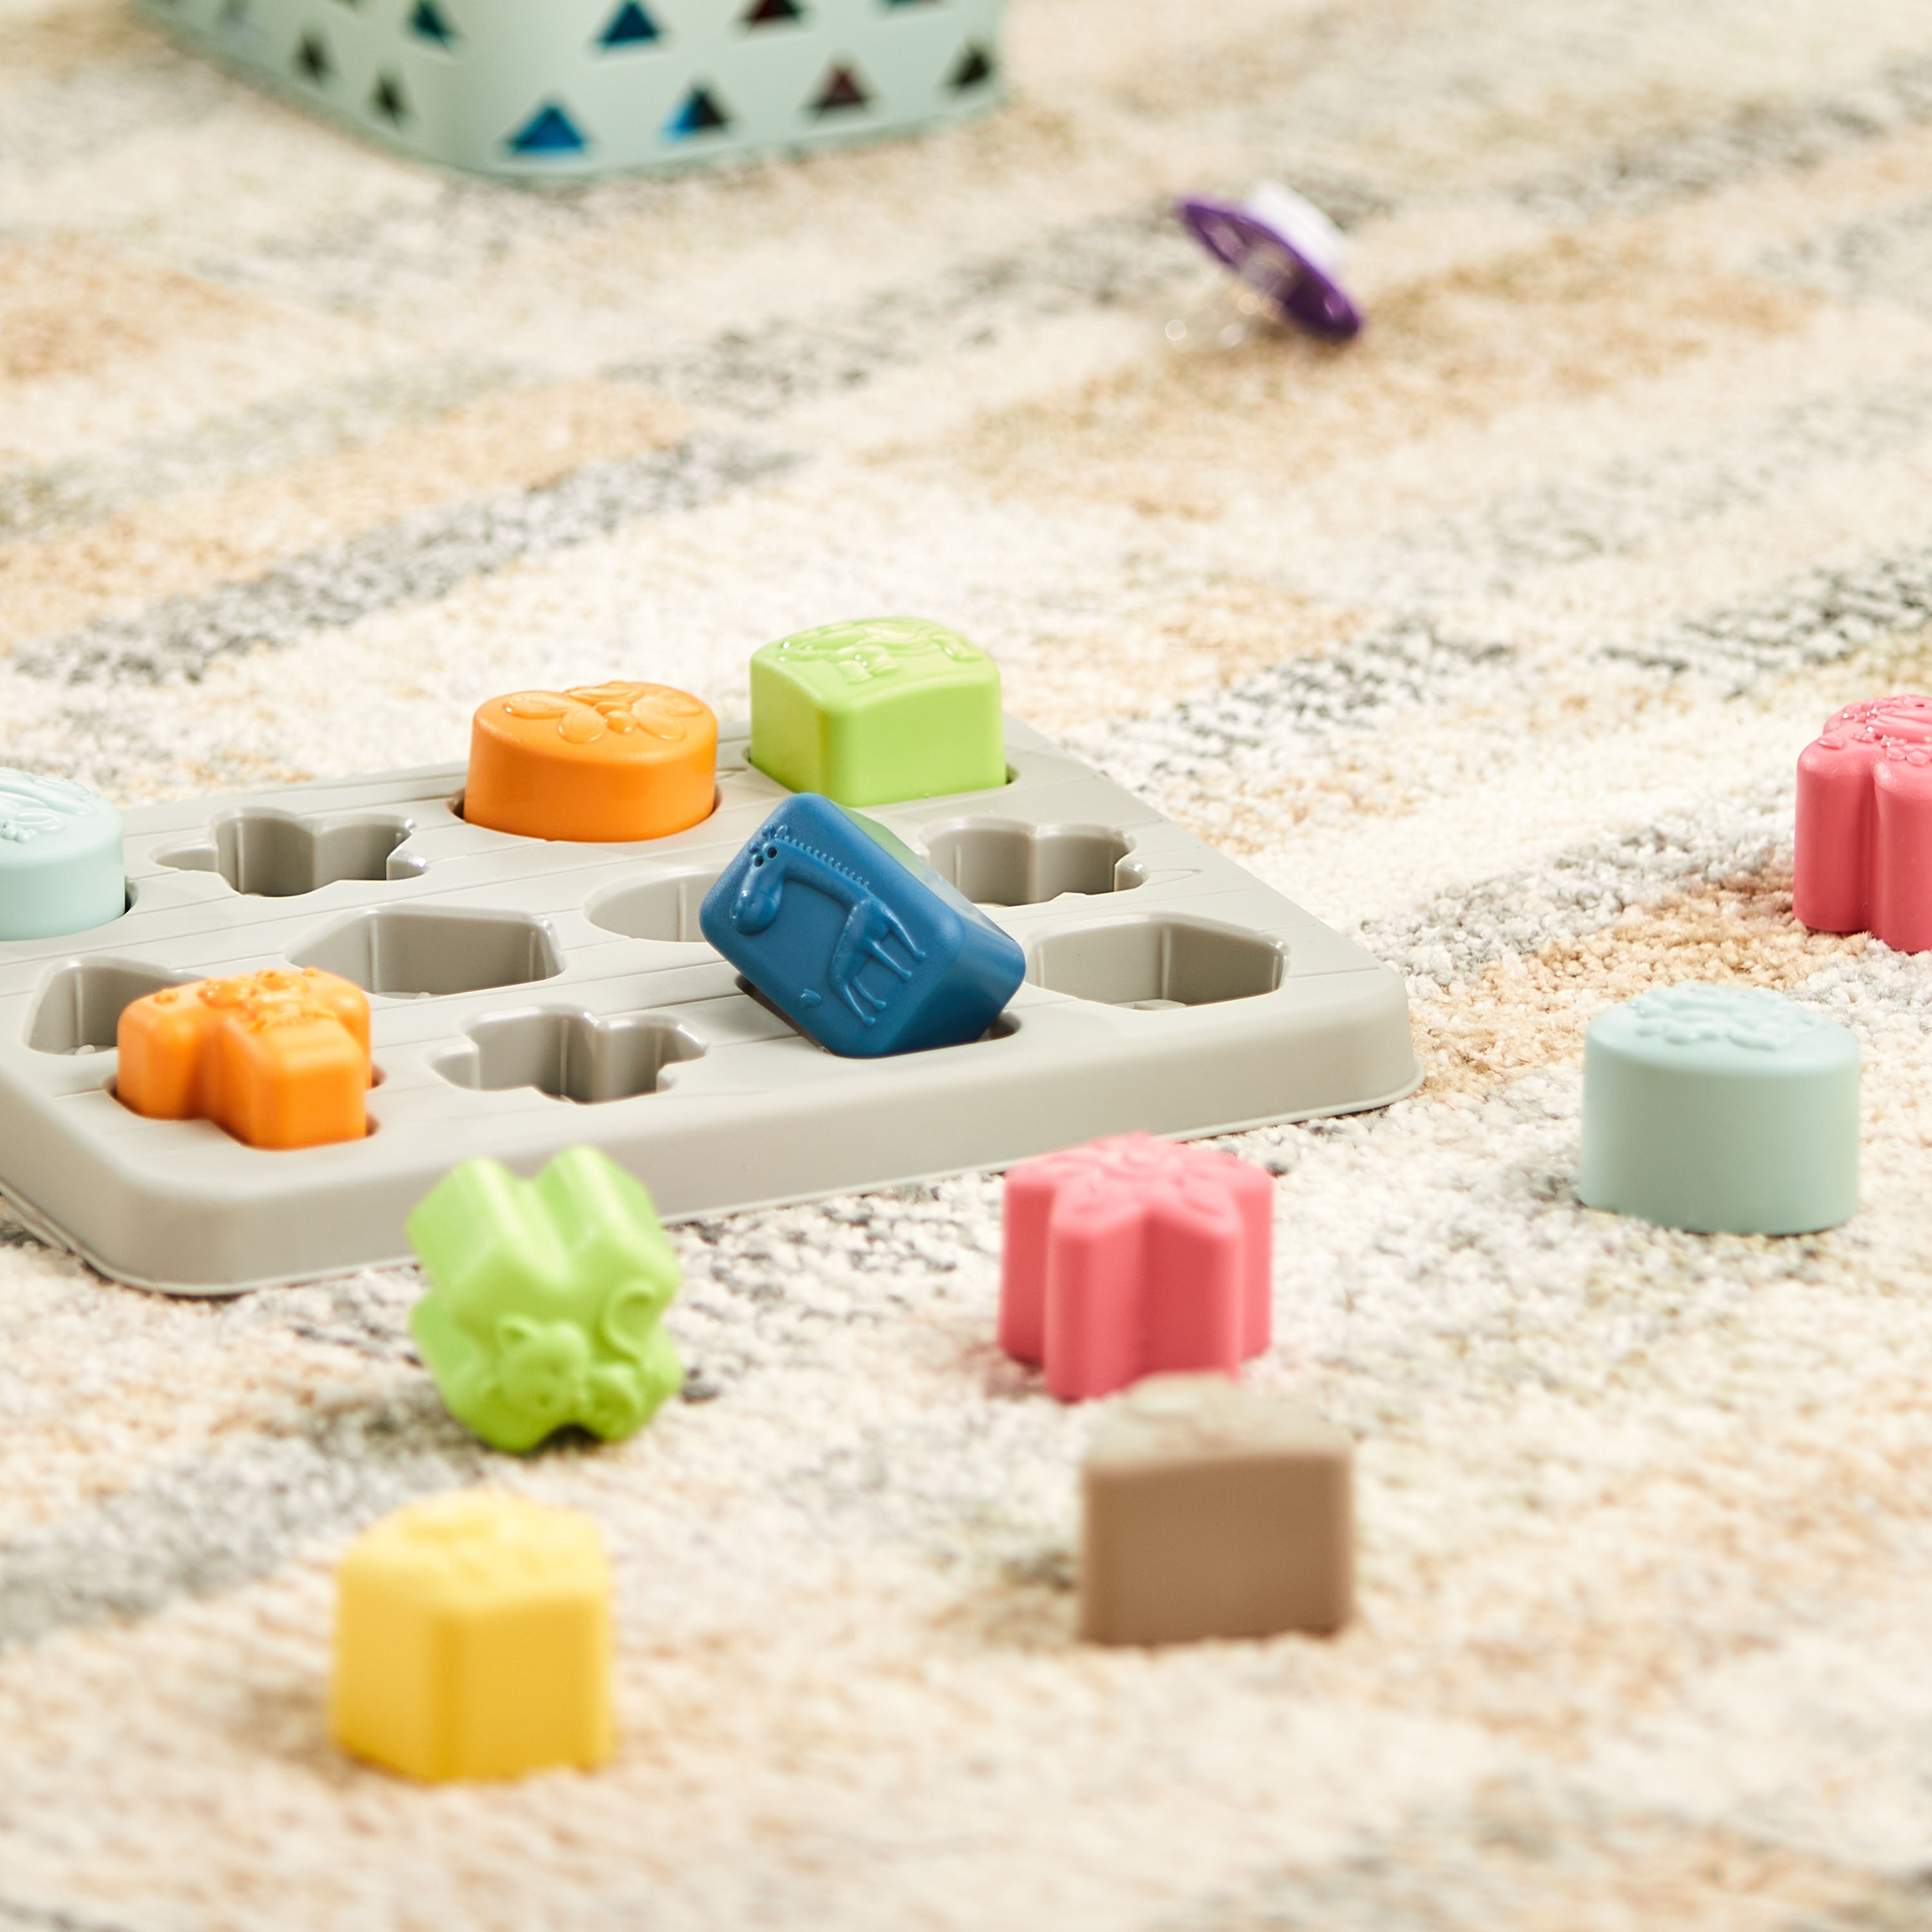 Spark Create Imagine 13-Piece Shape Sorting Sensory Puzzle, for Age Group 6 Months and up, 6m+ - image 3 of 8